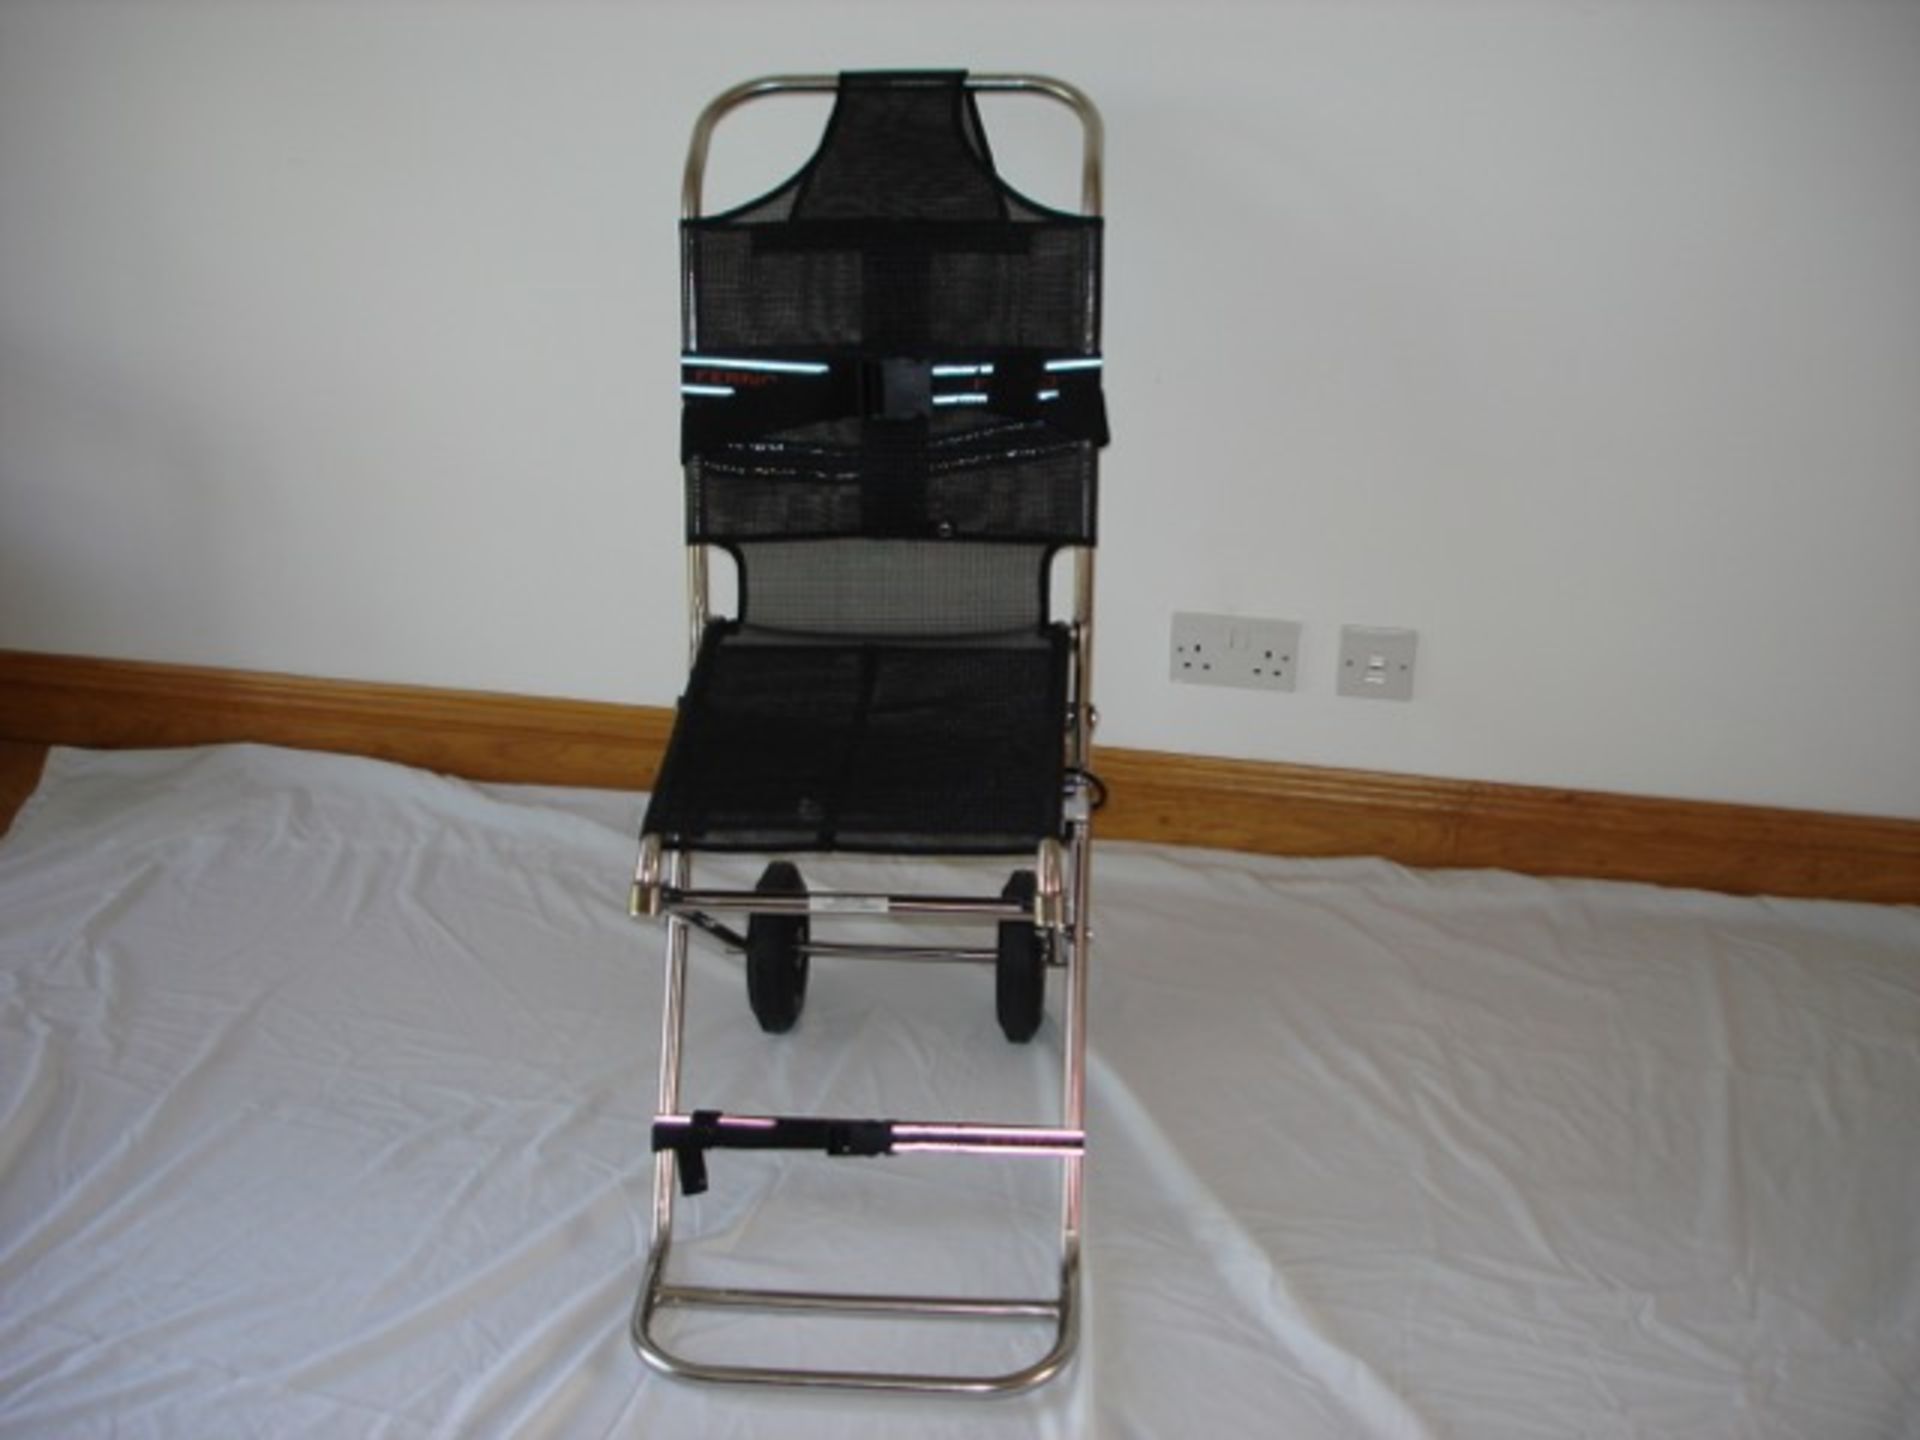 10 x FERNO DECON COMPACT 1 PATIENT CARRY CHAIR, new, never used still in box. ideal for nursing